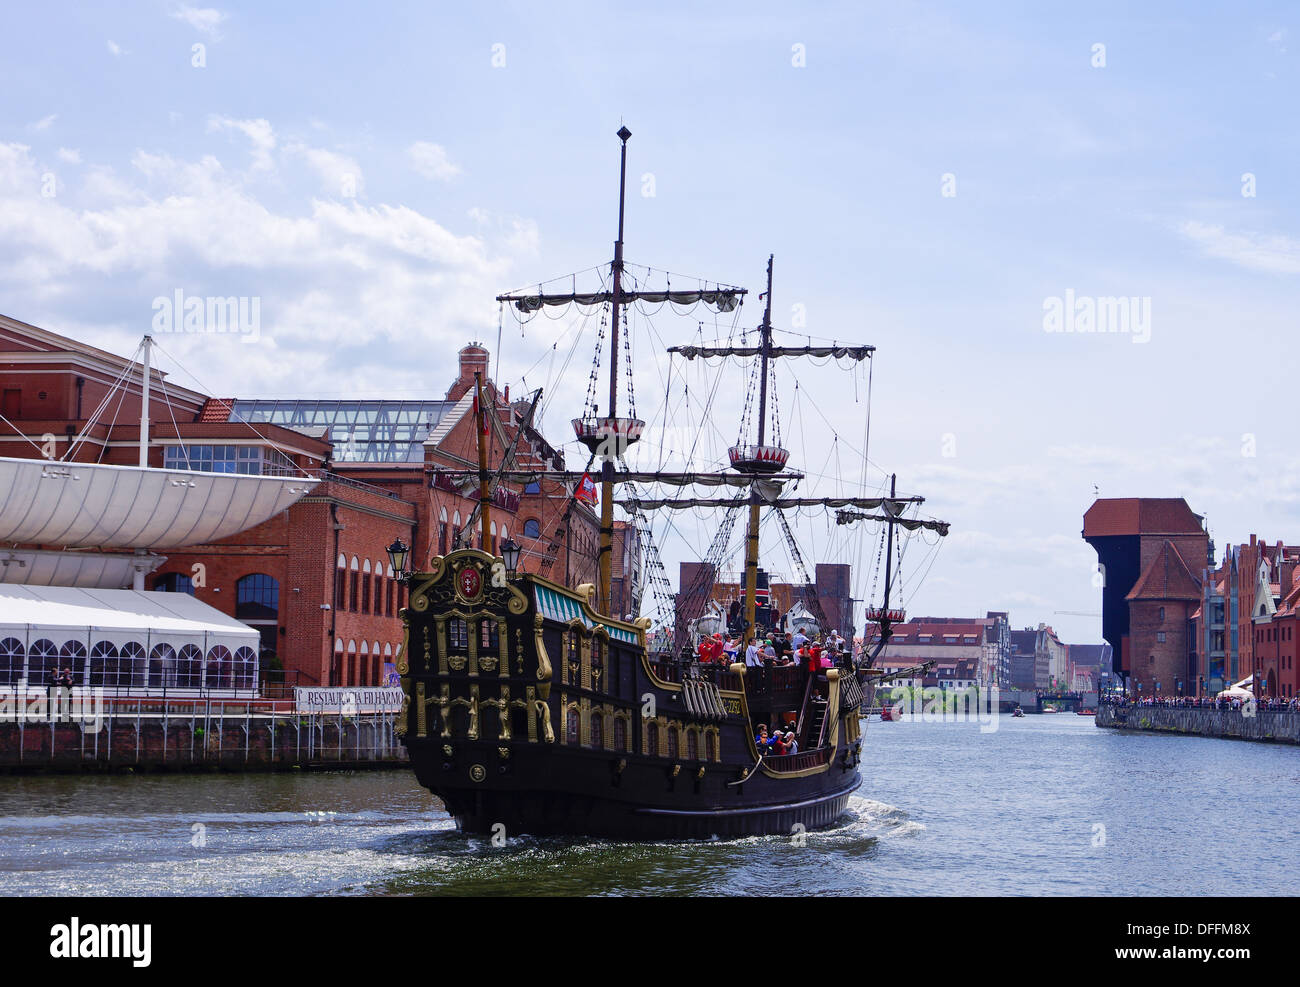 A tourist ship cruising on the Motlawa River in the Gdansk city center in Poland Stock Photo